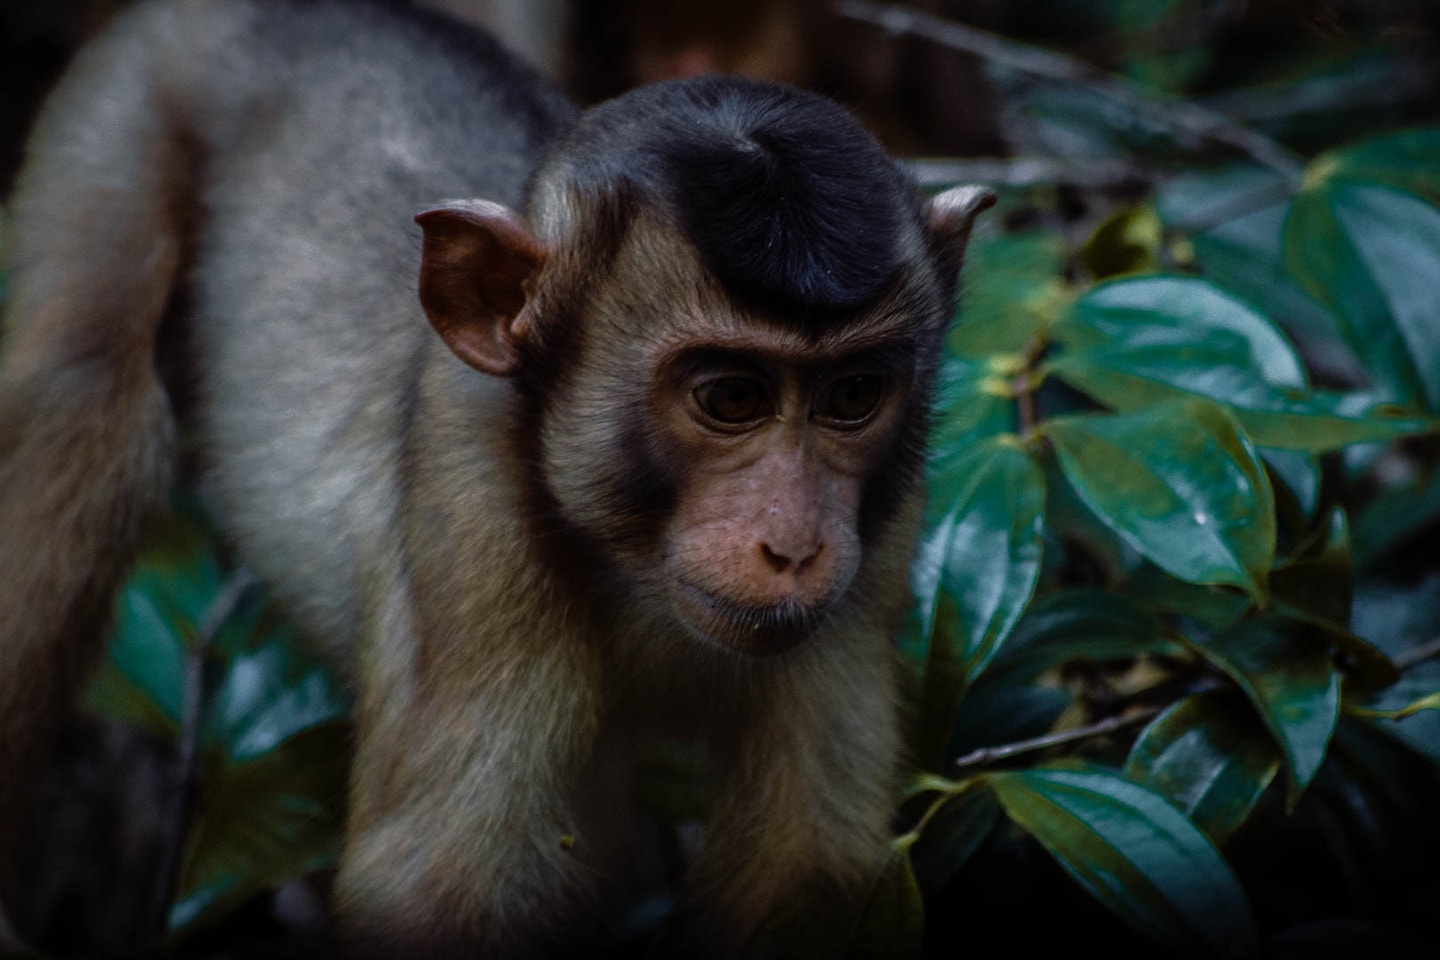 Pig tailed-macaque in Borneo